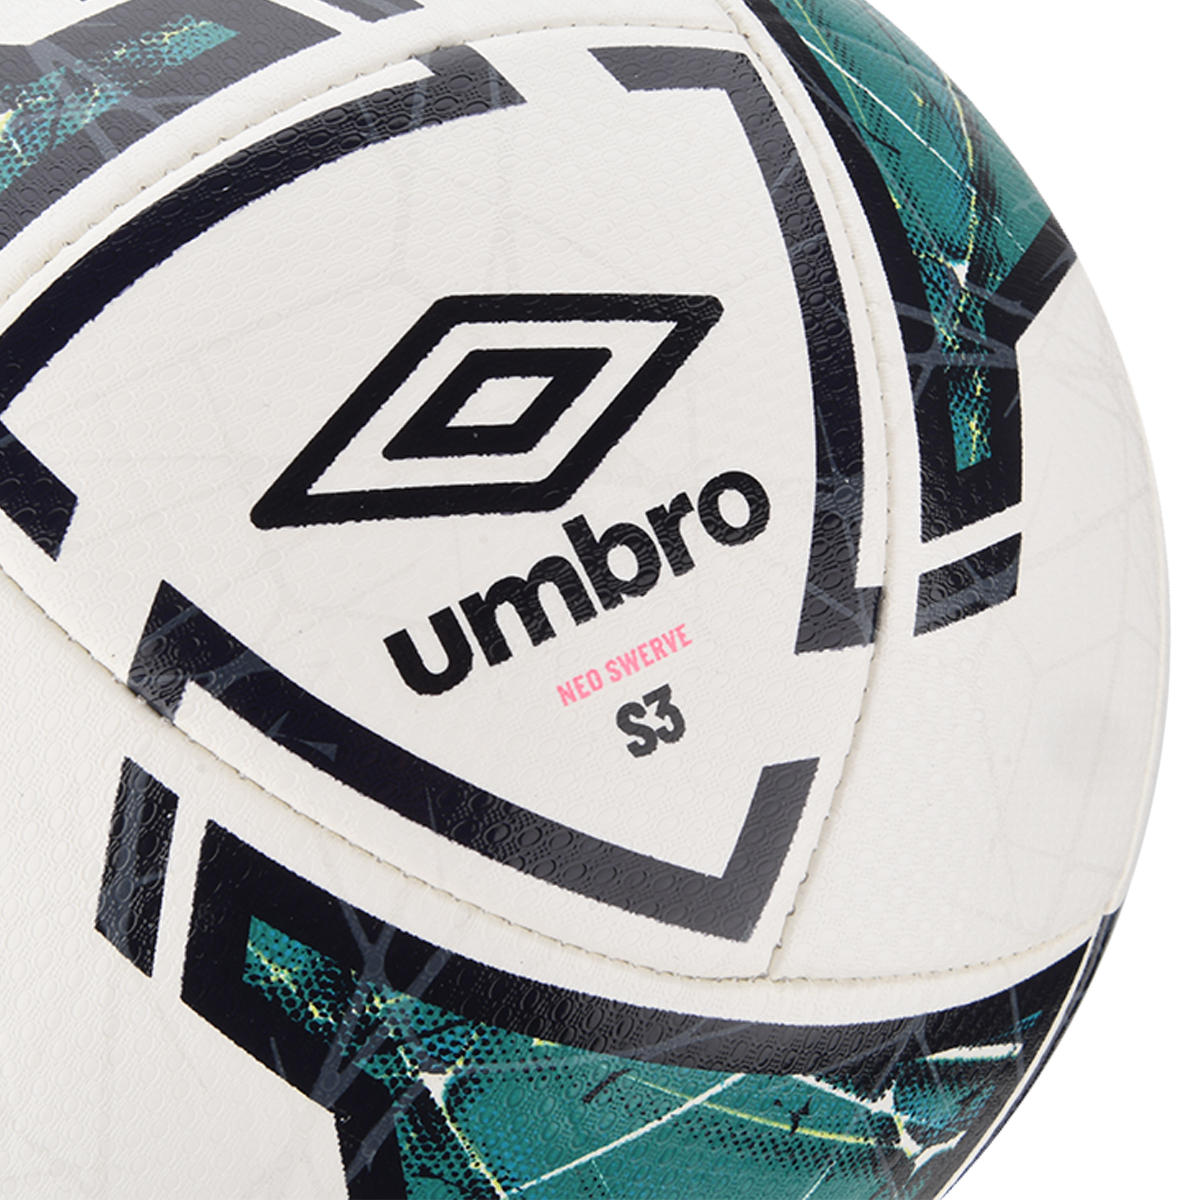 Pelota Umbro Neo Swerve Non Ims N3,  image number null